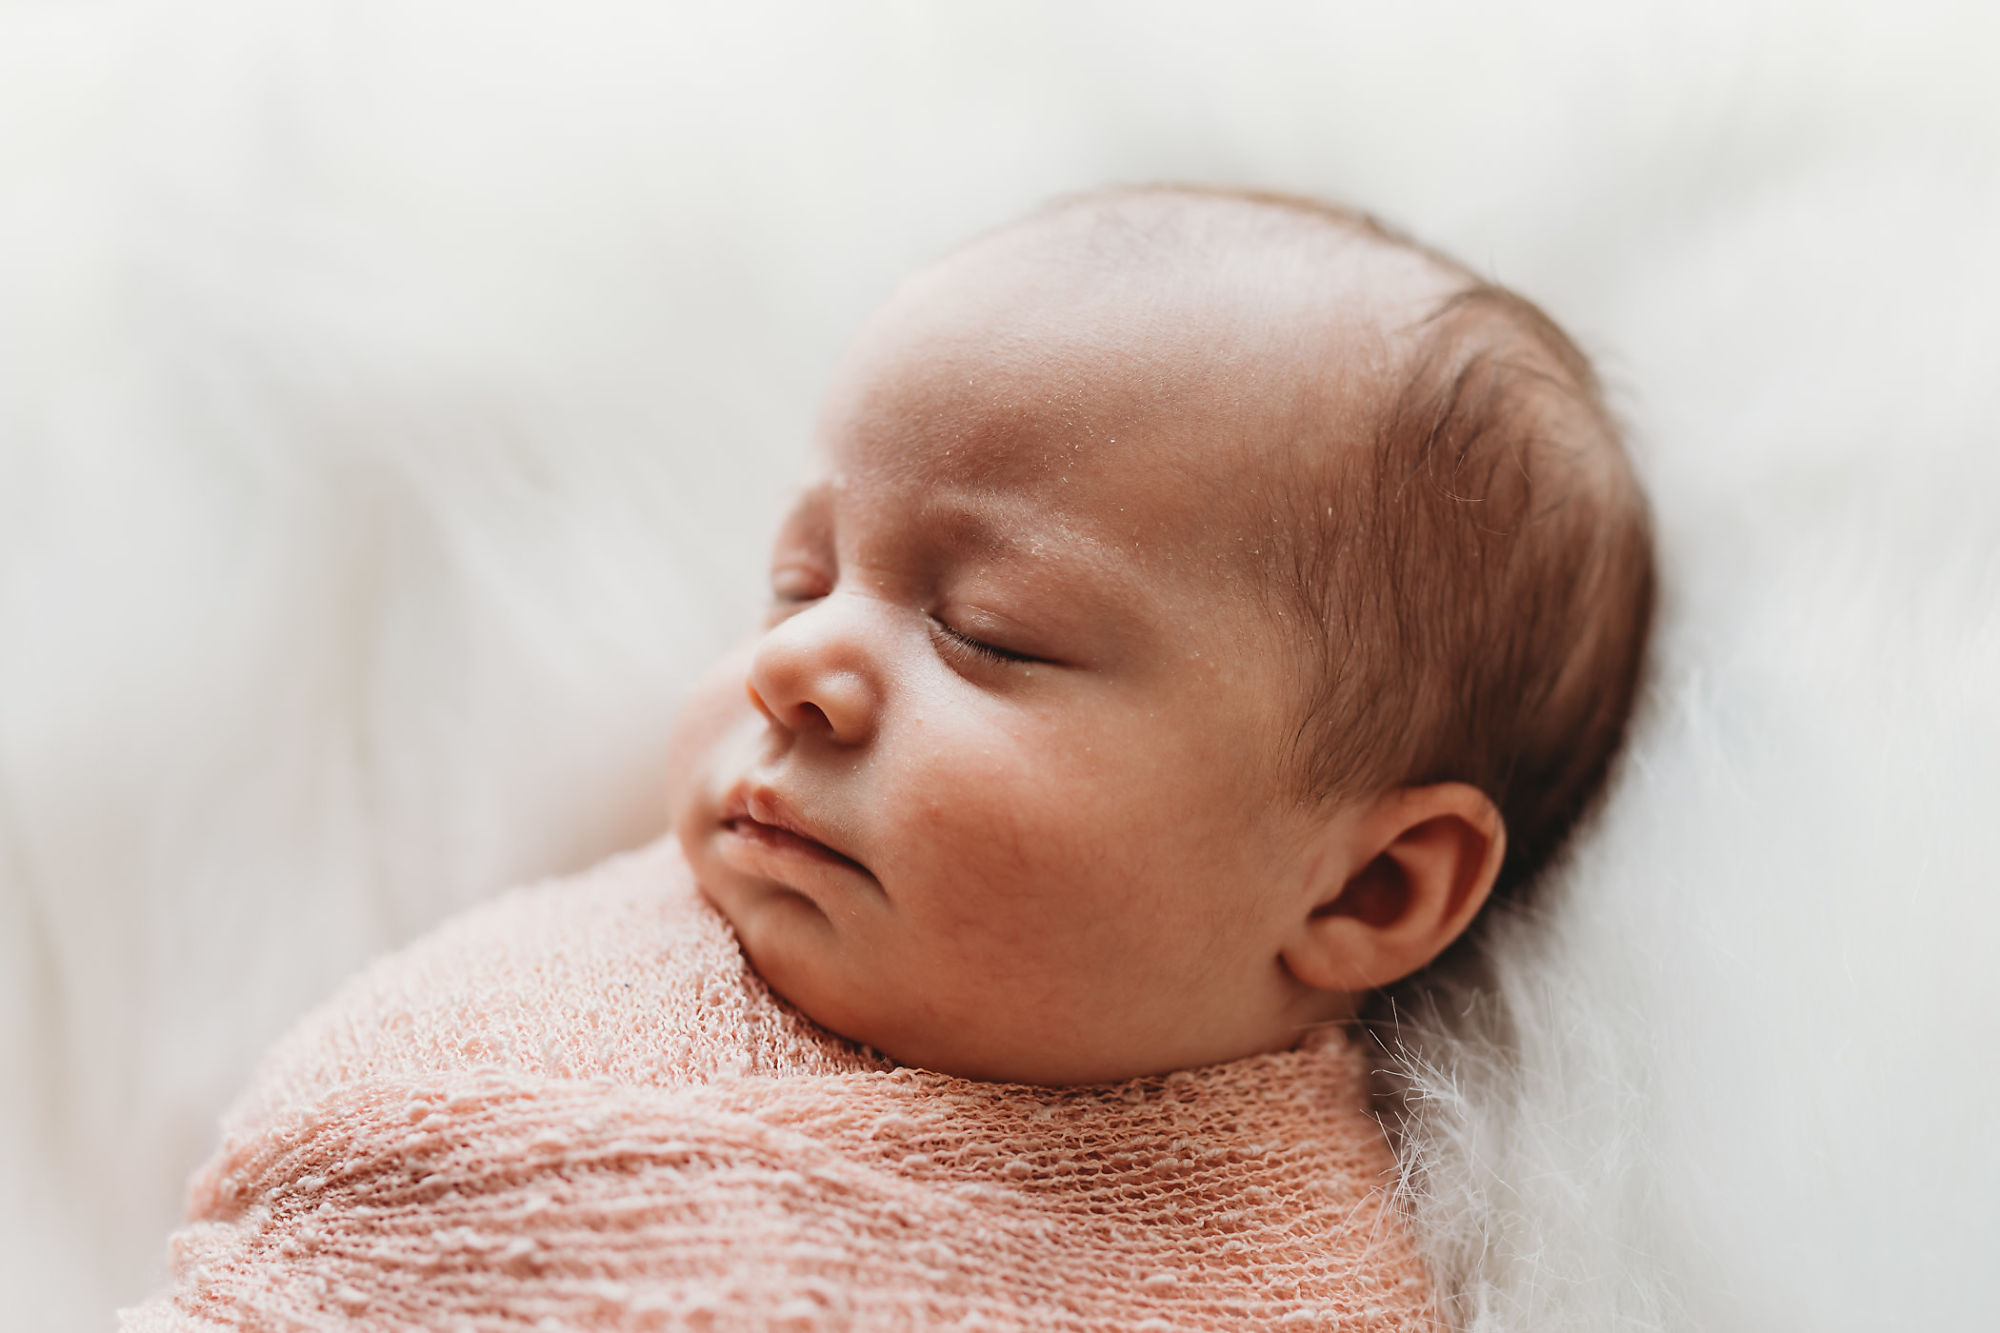 Lifestyle Hamilton Newborn Photographer Jennifer Blaak captures baby in a gentle moment of rest during this newborn photography session in Hamilton.